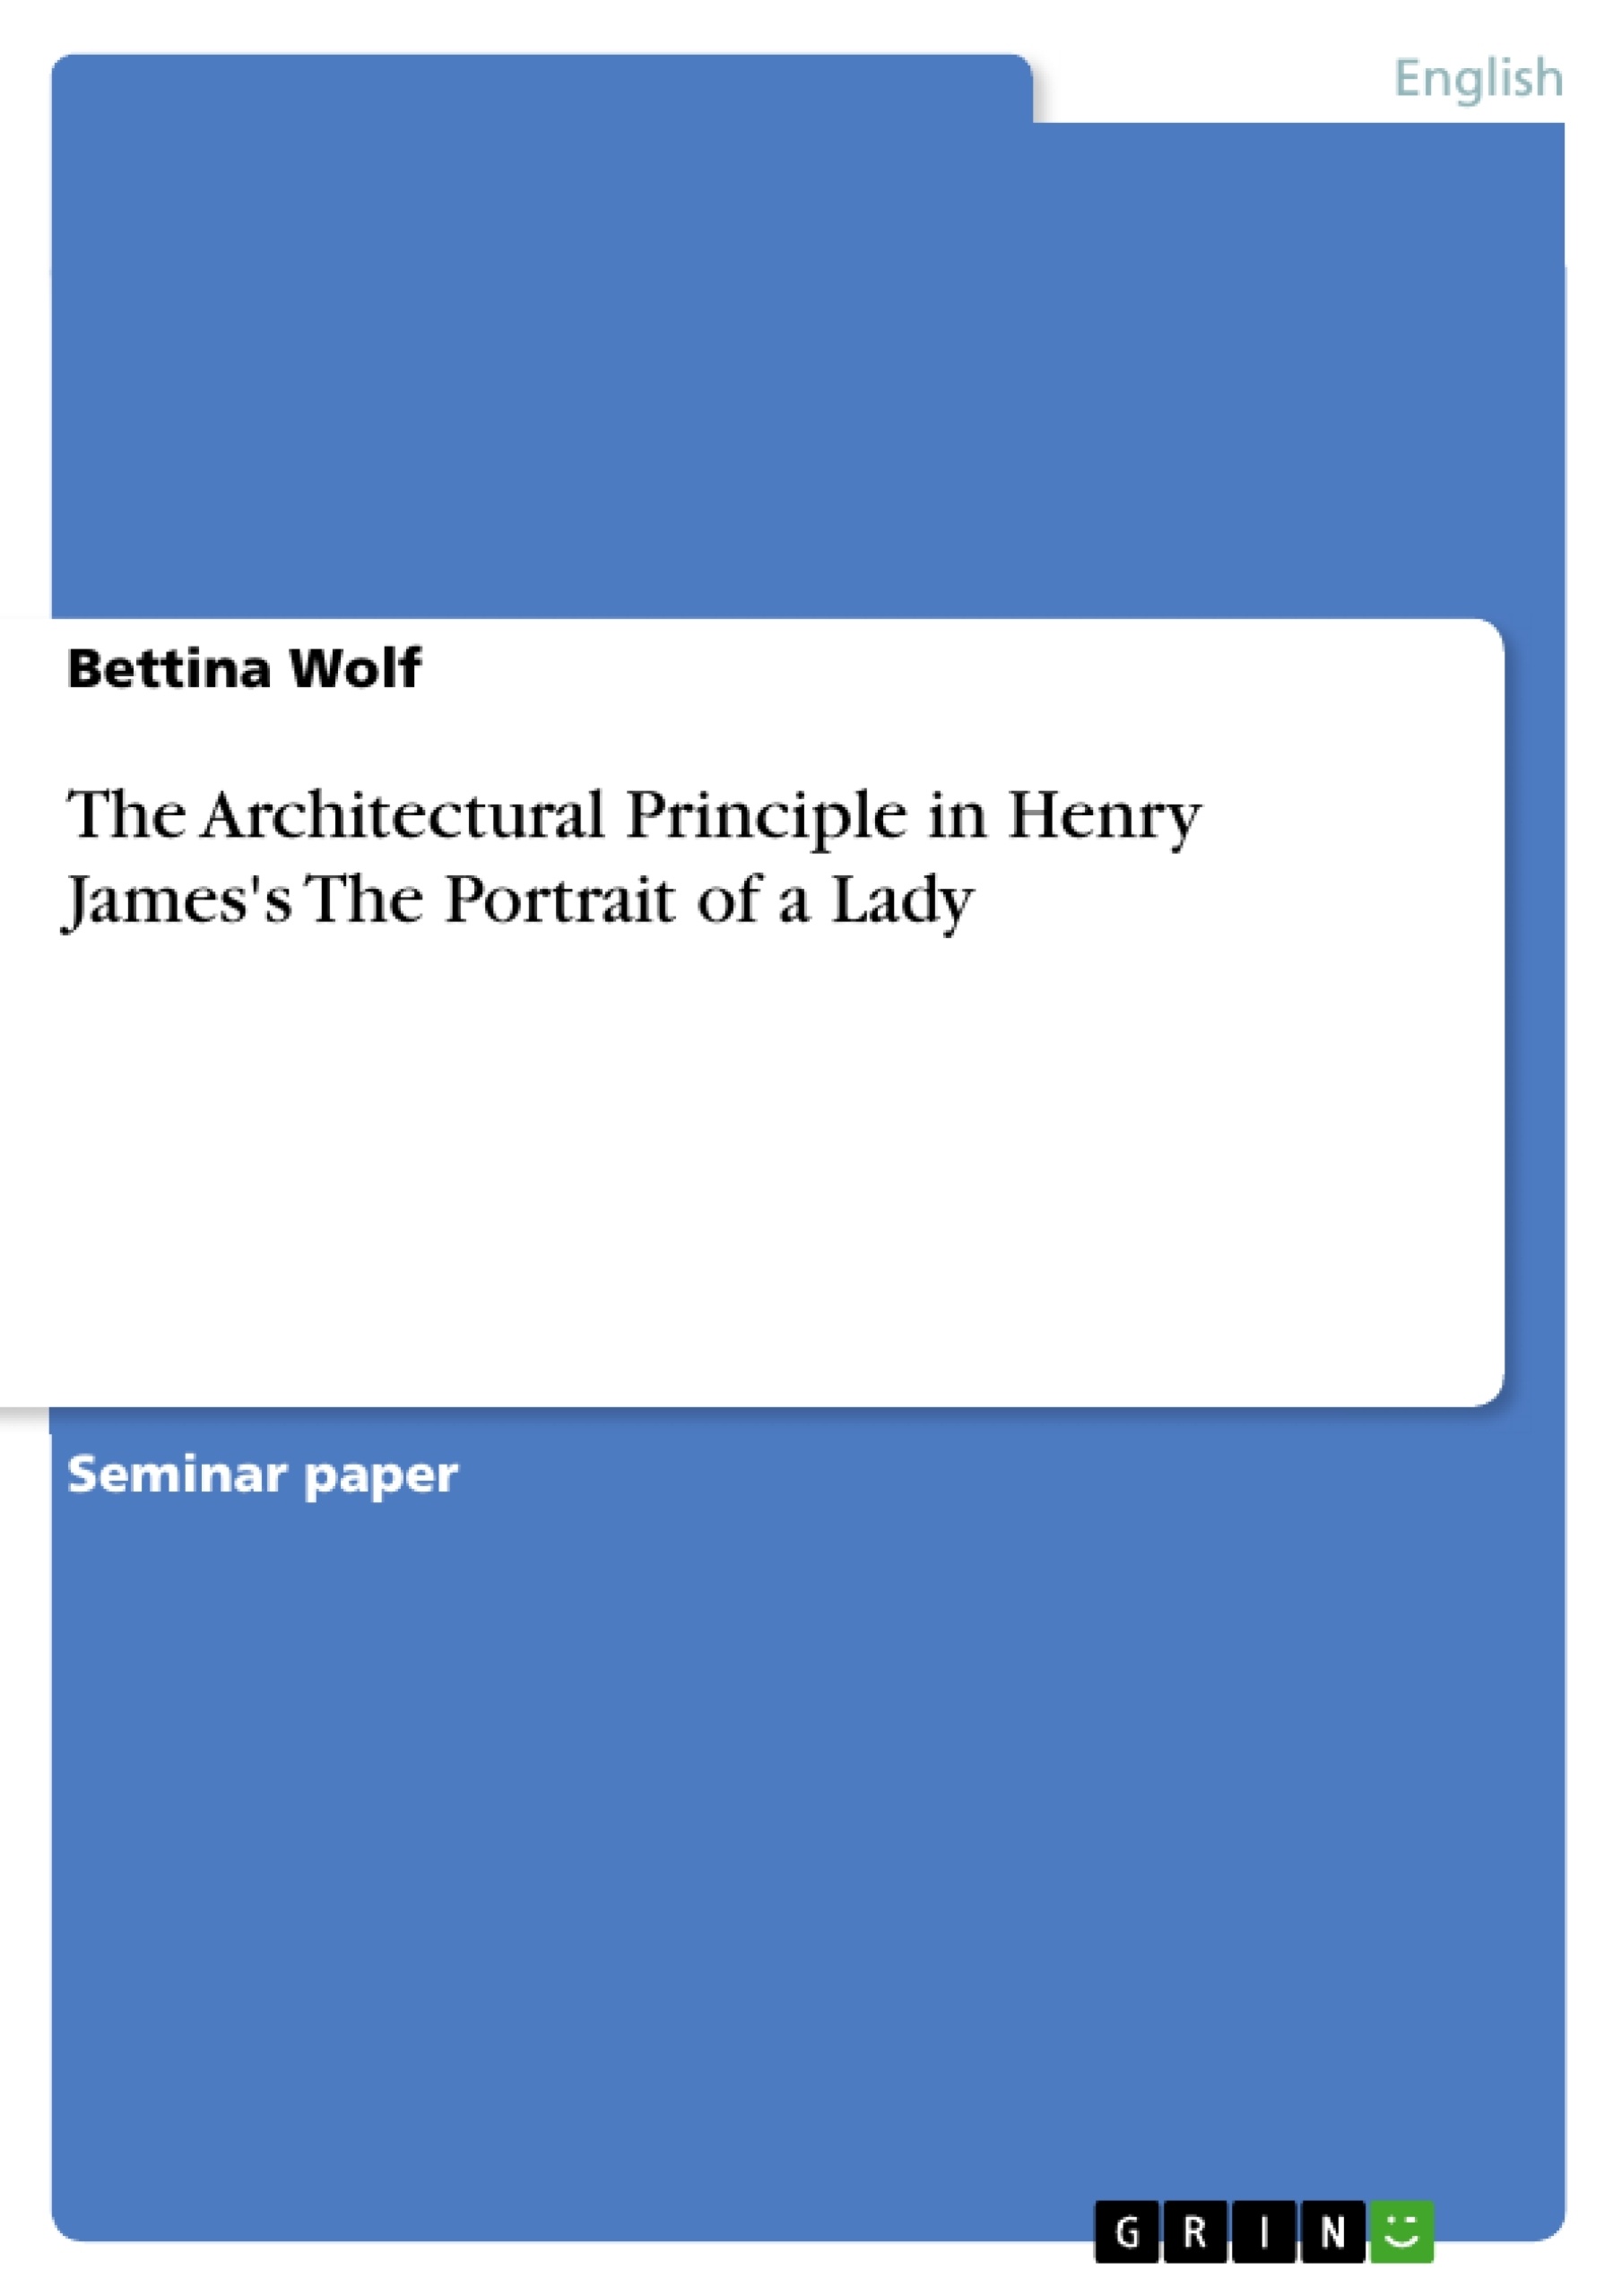 Title: The Architectural Principle in Henry James's The Portrait of a Lady